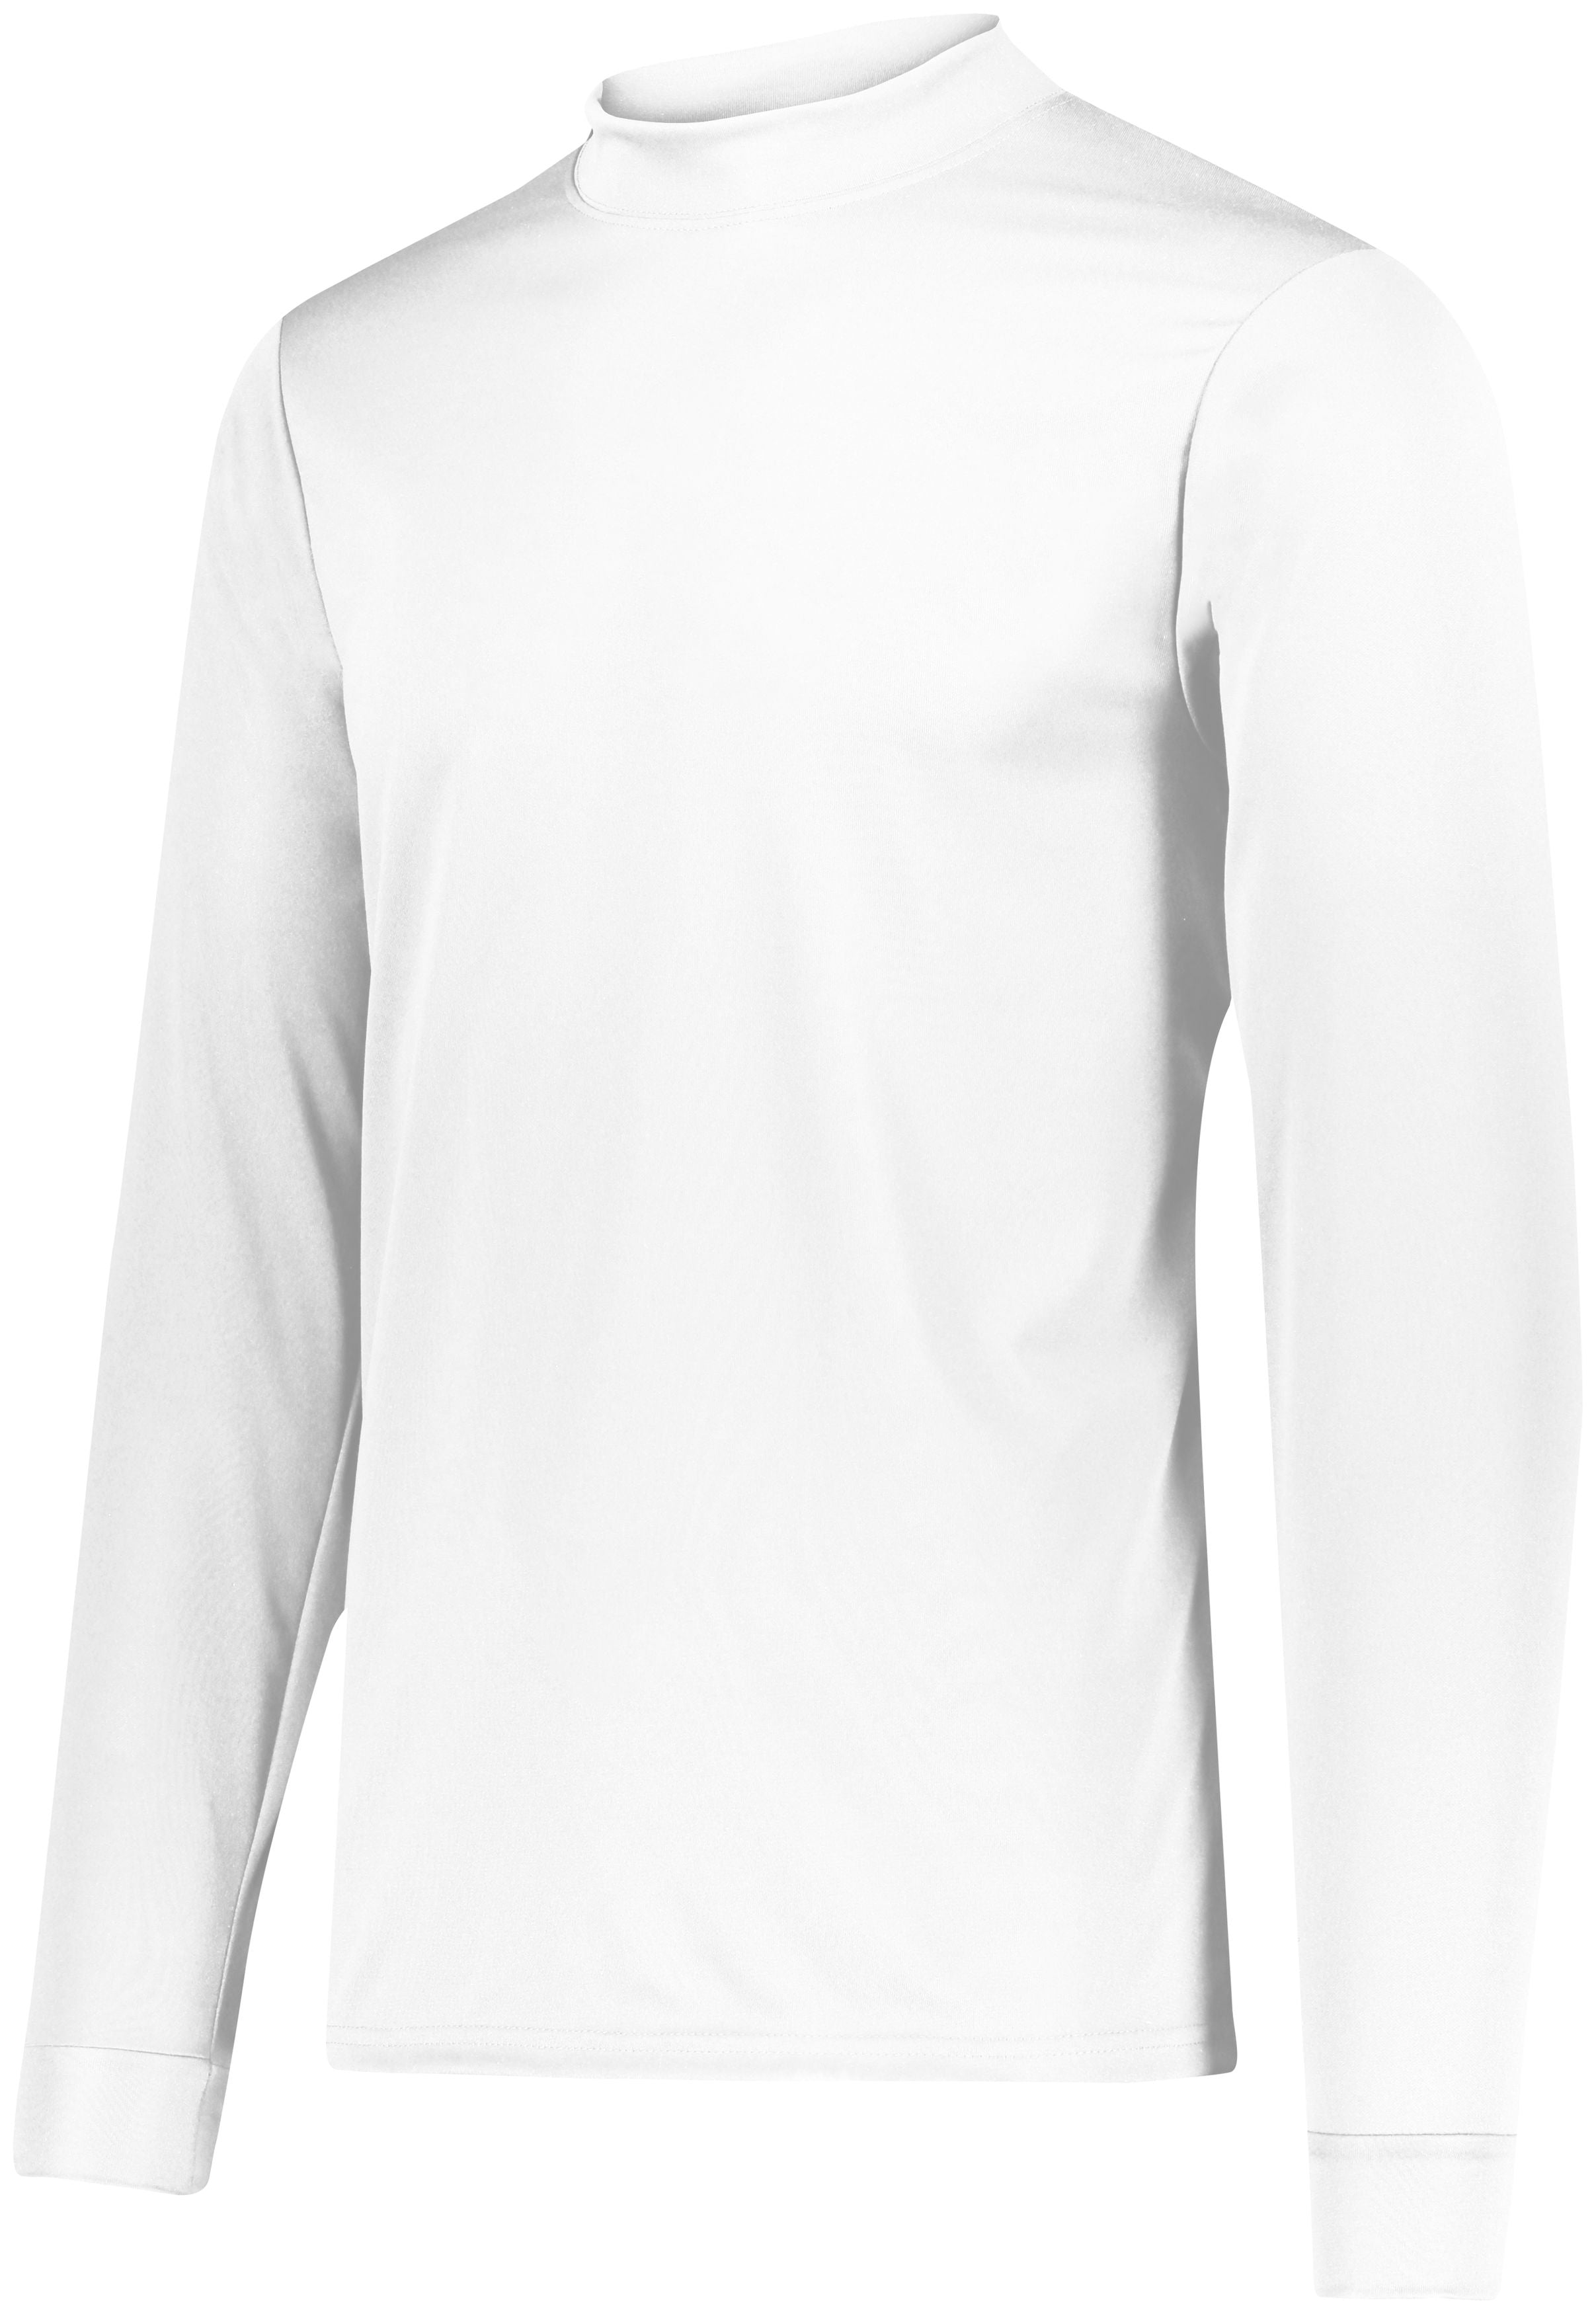 Augusta Sportswear Wicking Mock Turtleneck in White  -Part of the Adult, Augusta-Products, Tennis, Shirts product lines at KanaleyCreations.com